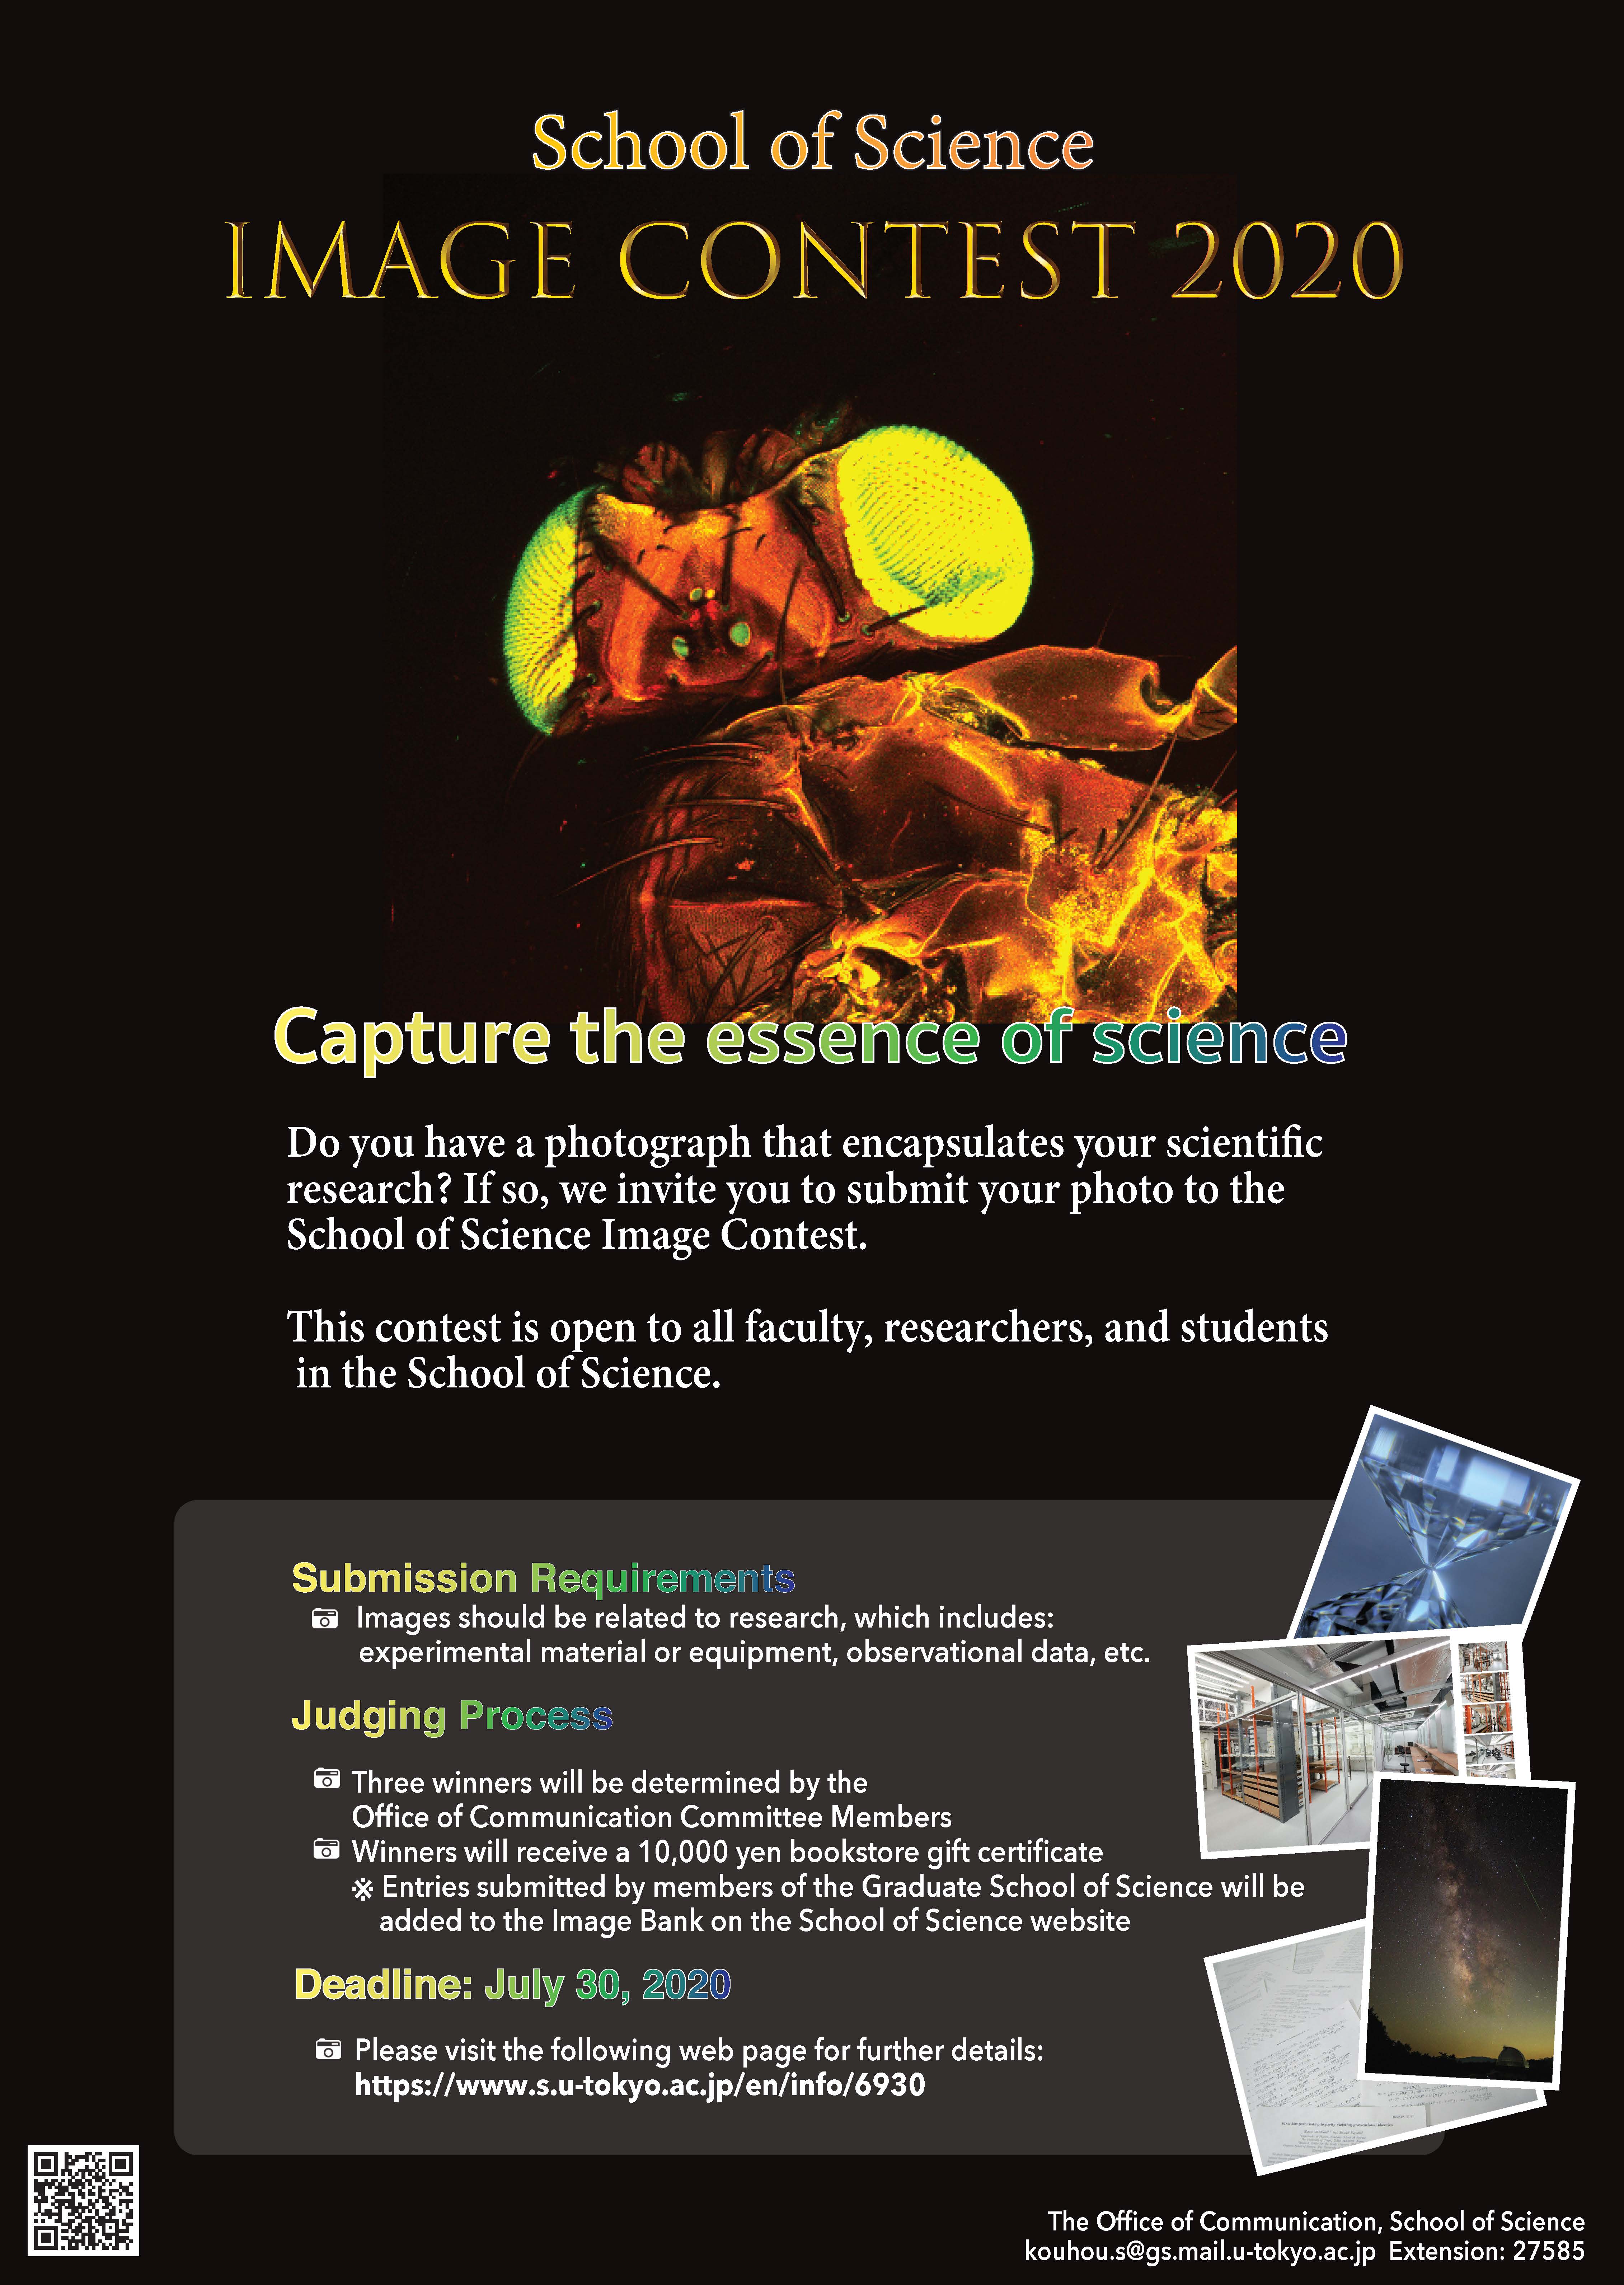 【UTokyo Members Only】School of Science Image Contest 2020